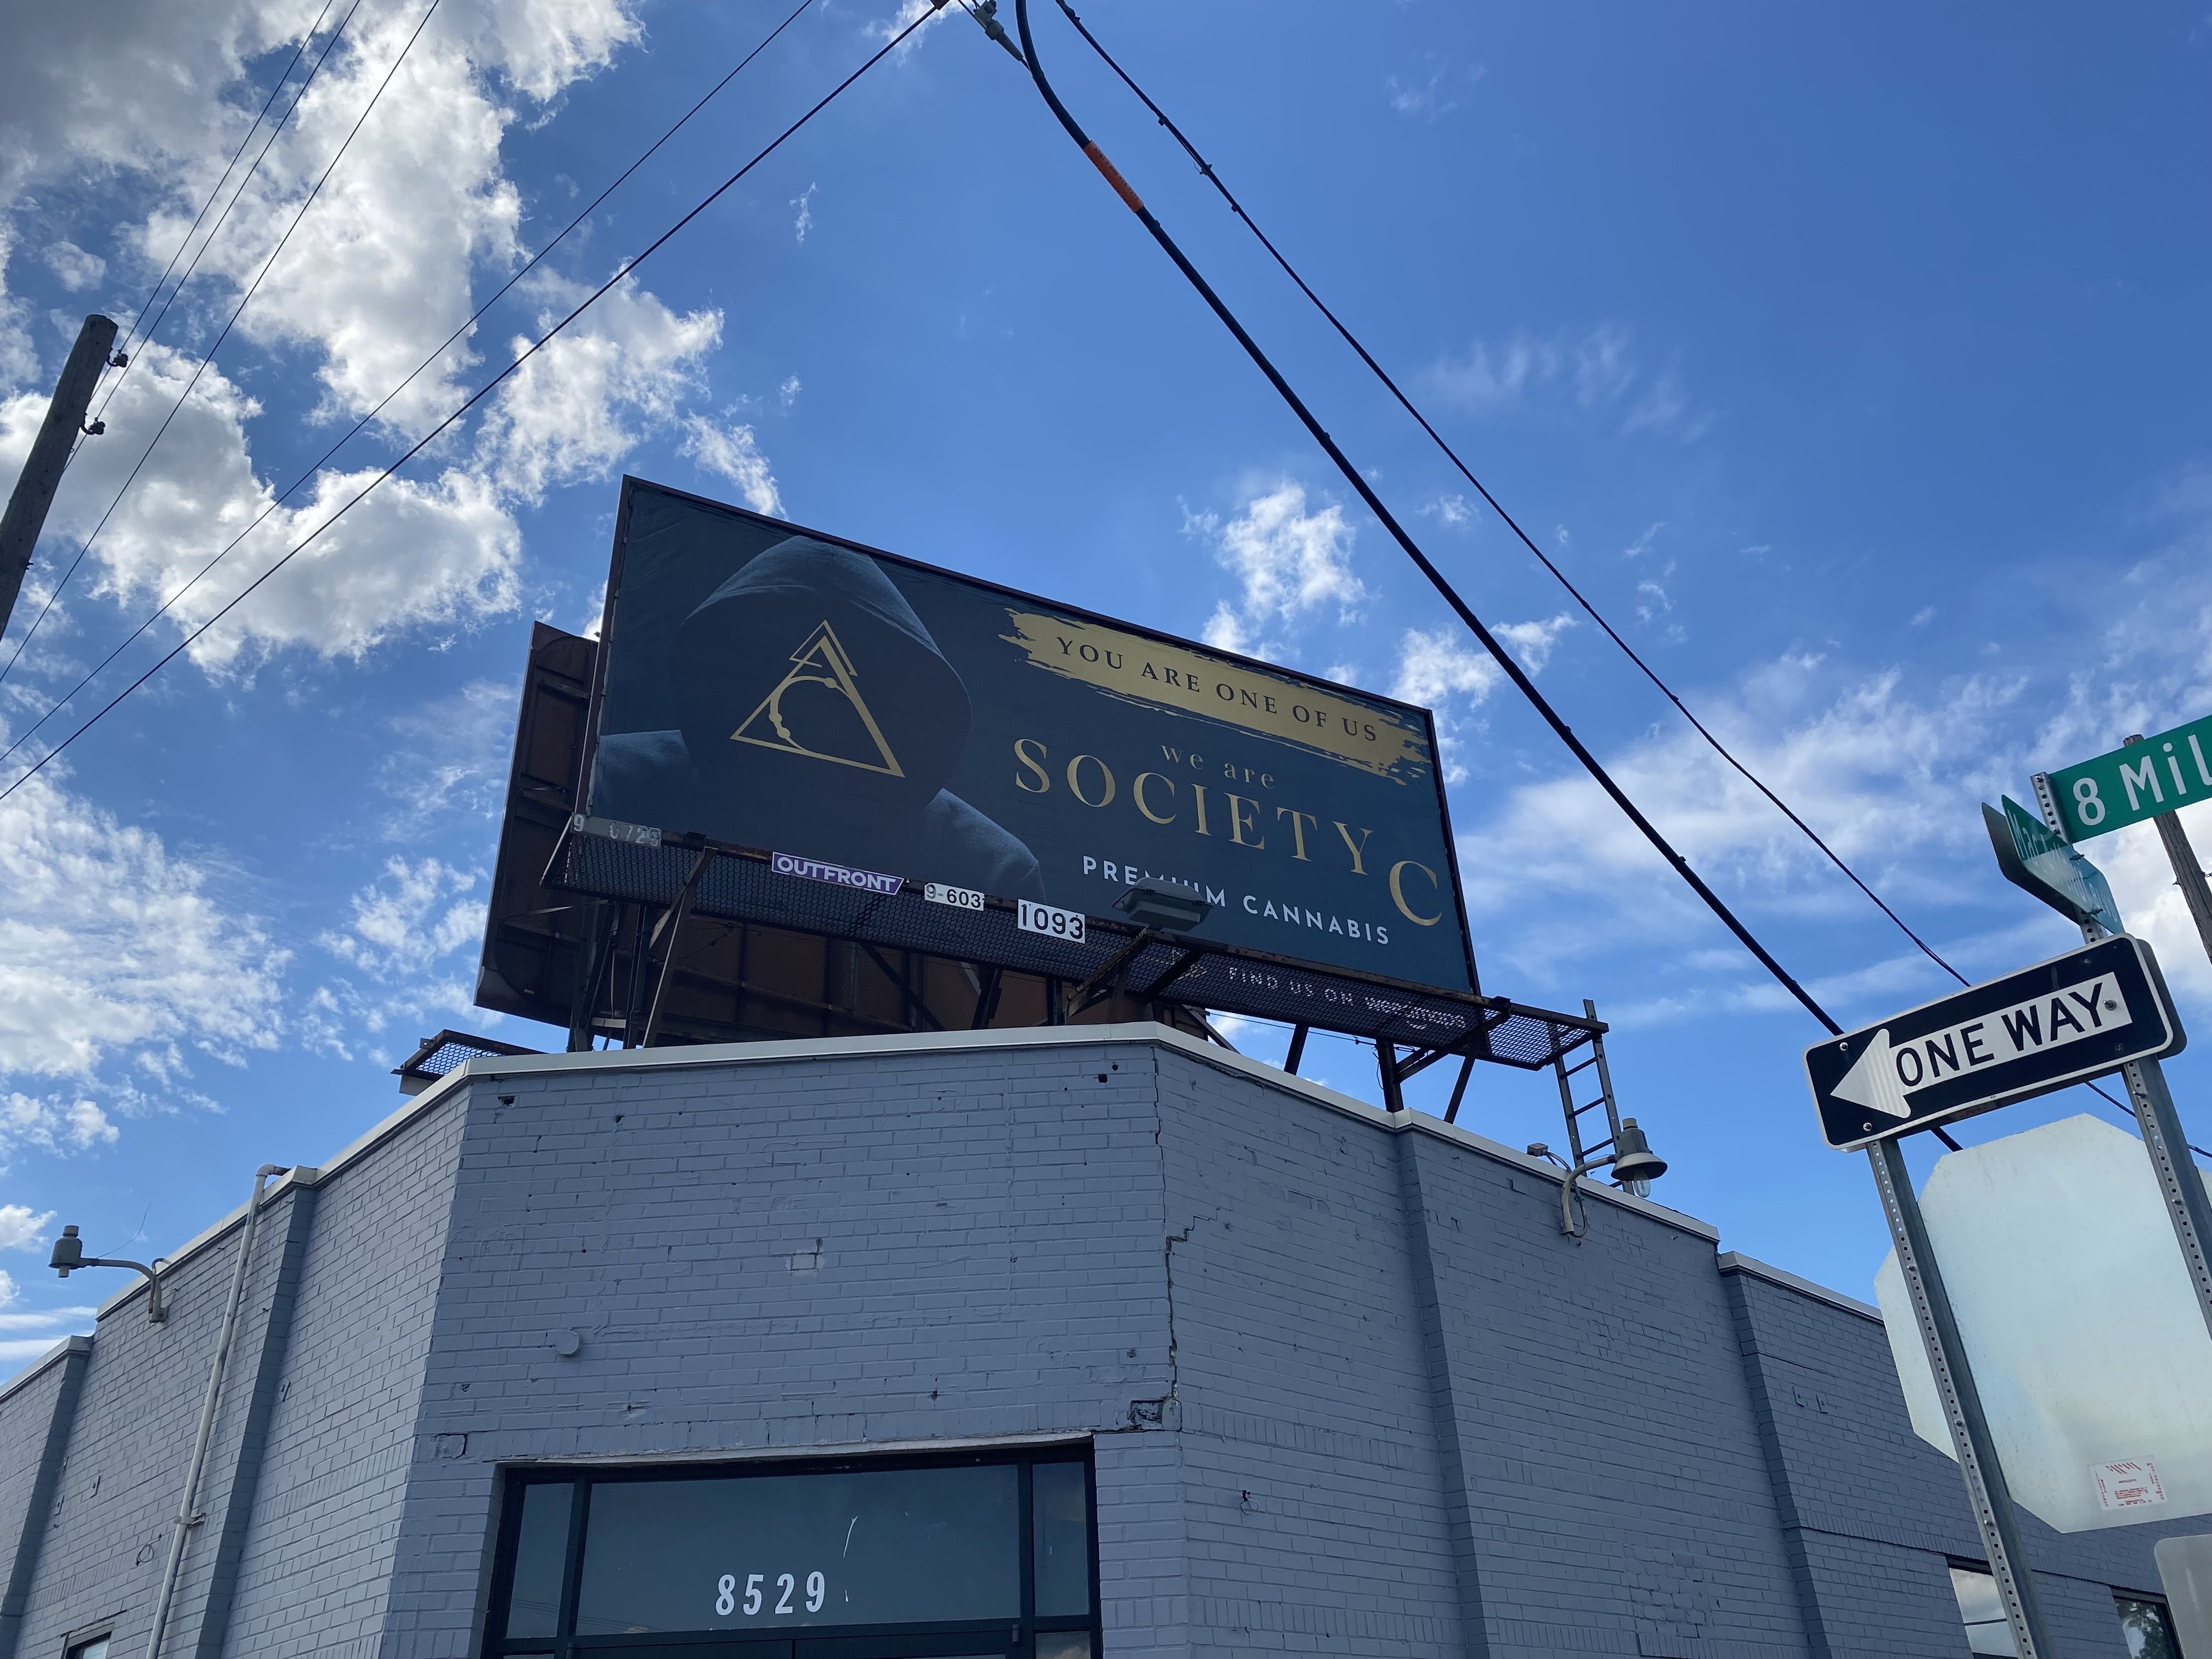 A billboard shows a hooded figure with a symbol overlaid and "We are Society C" cannabis 